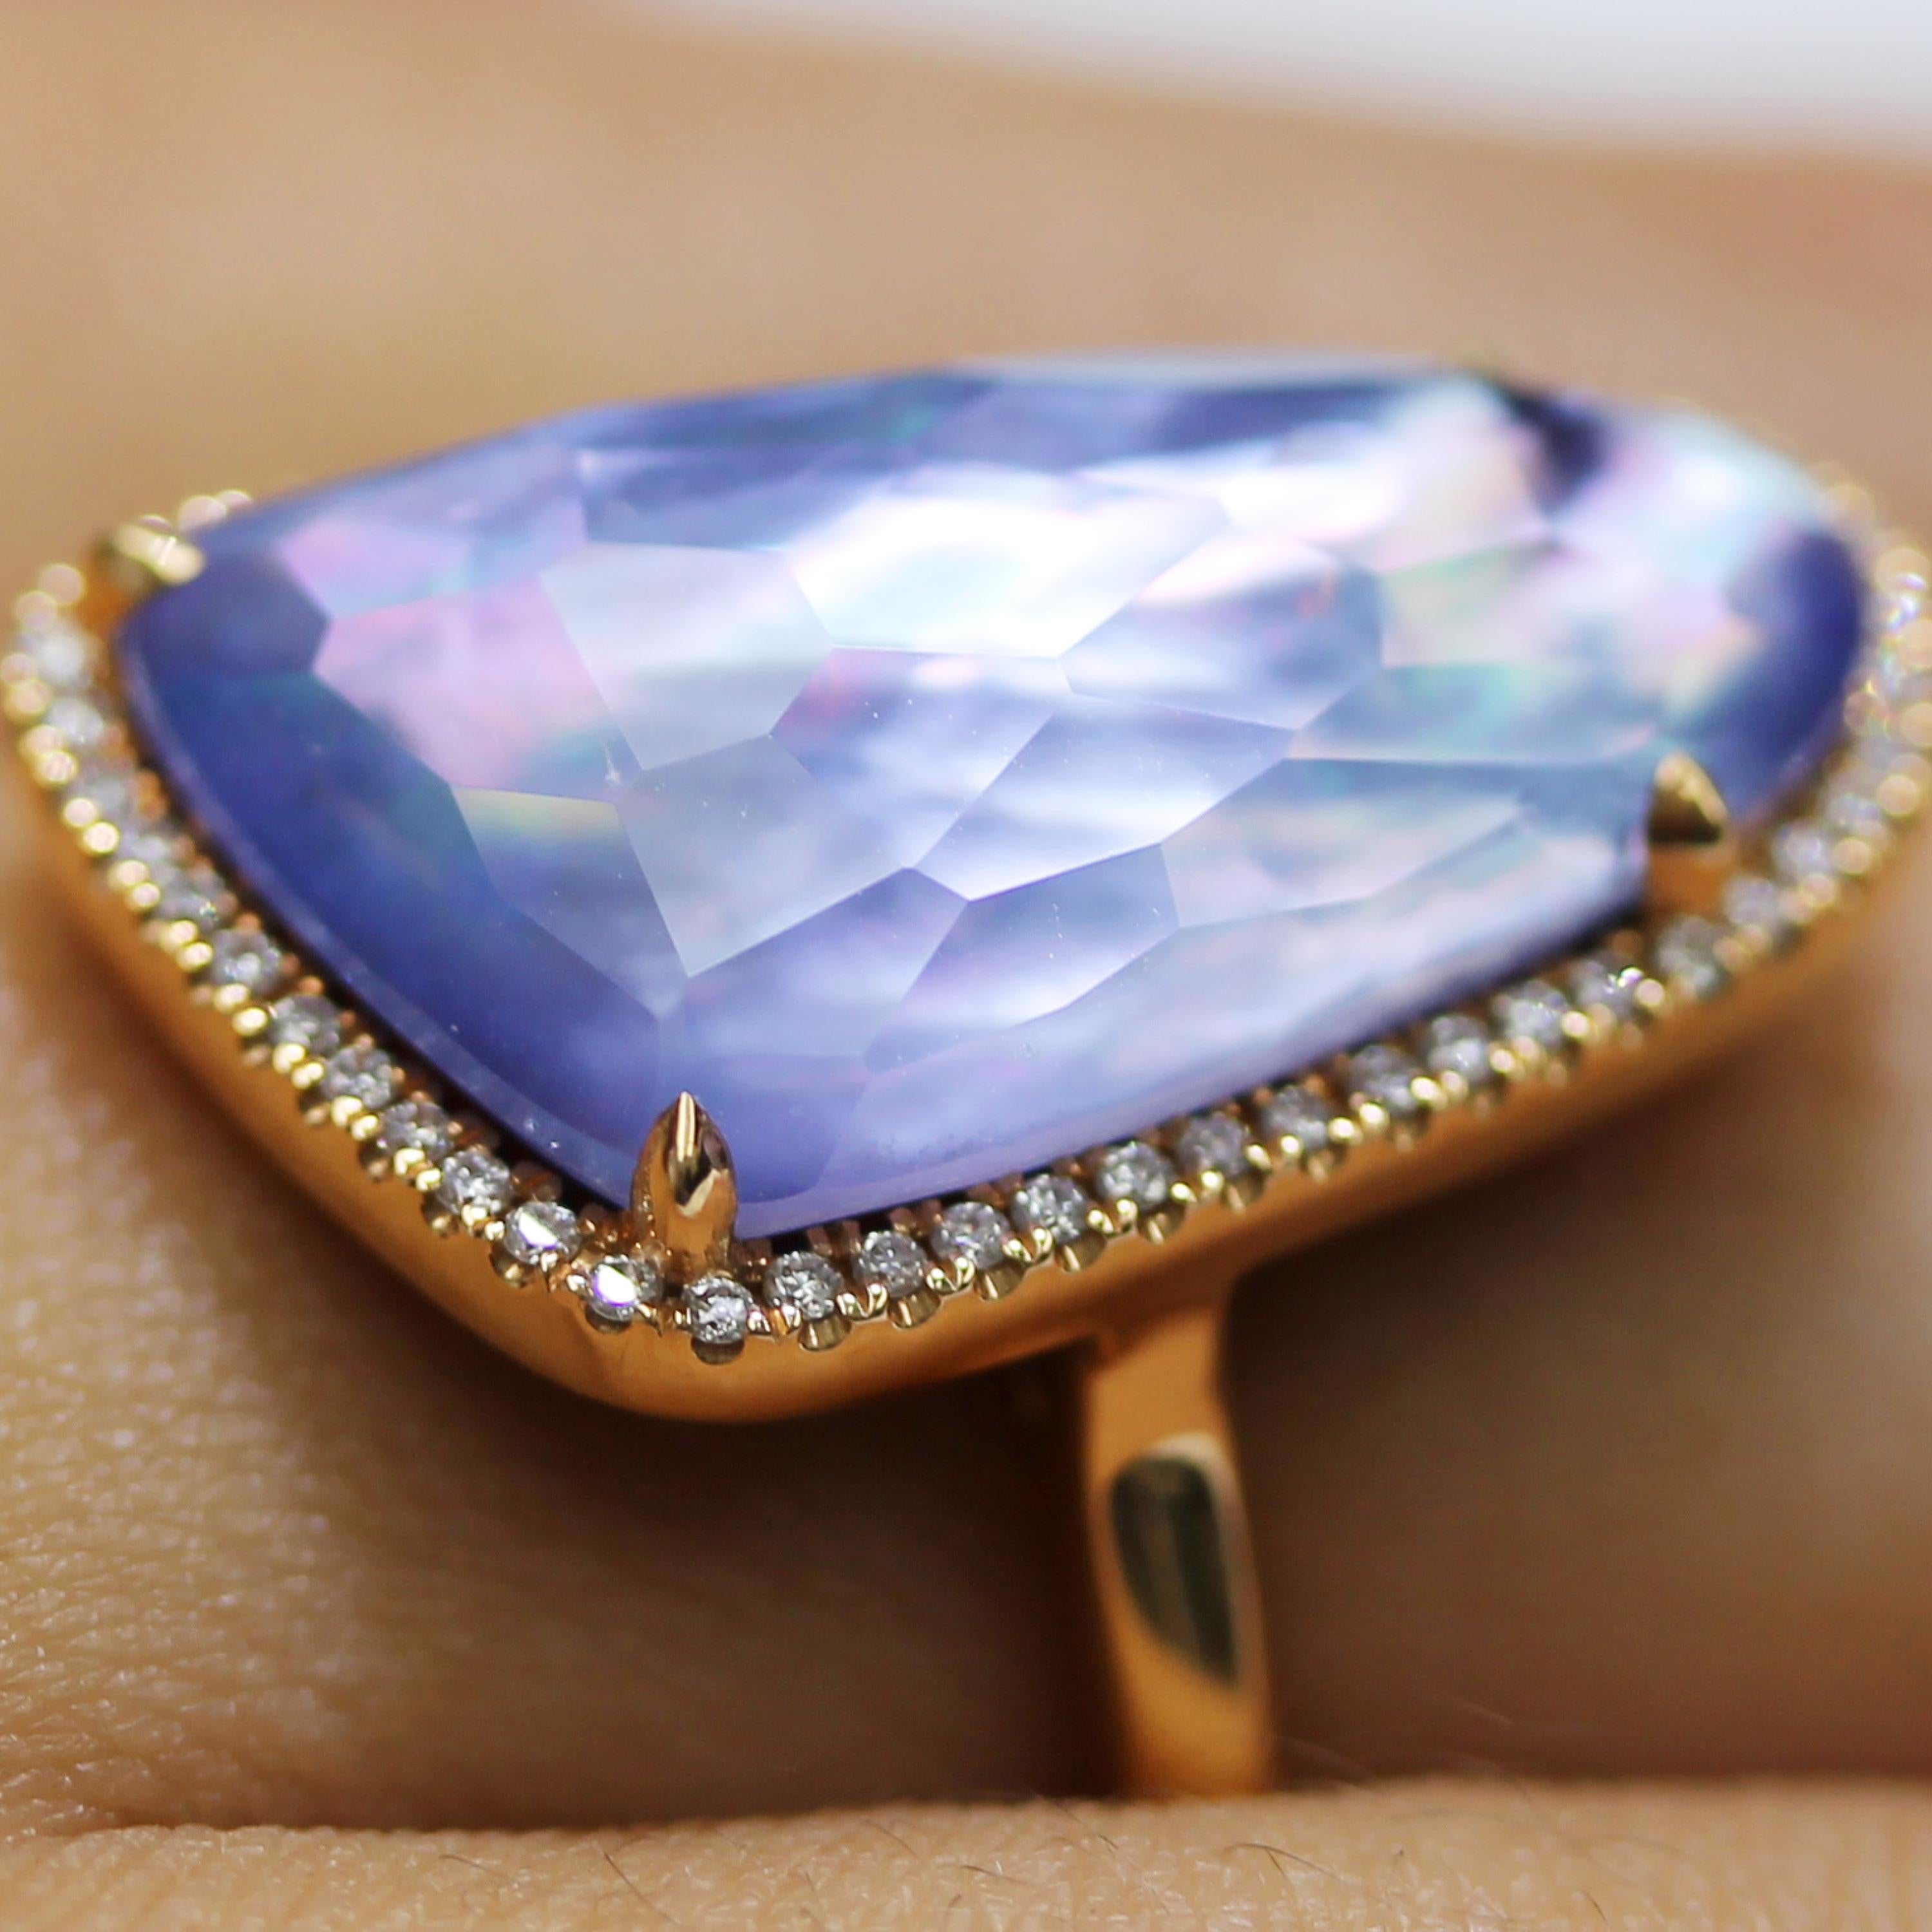 18K Rose Gold Cocktail Ring w/Lapis Lazuli, Mother of Pearl, Amethyst & Diamonds In New Condition For Sale In Great Neck, NY